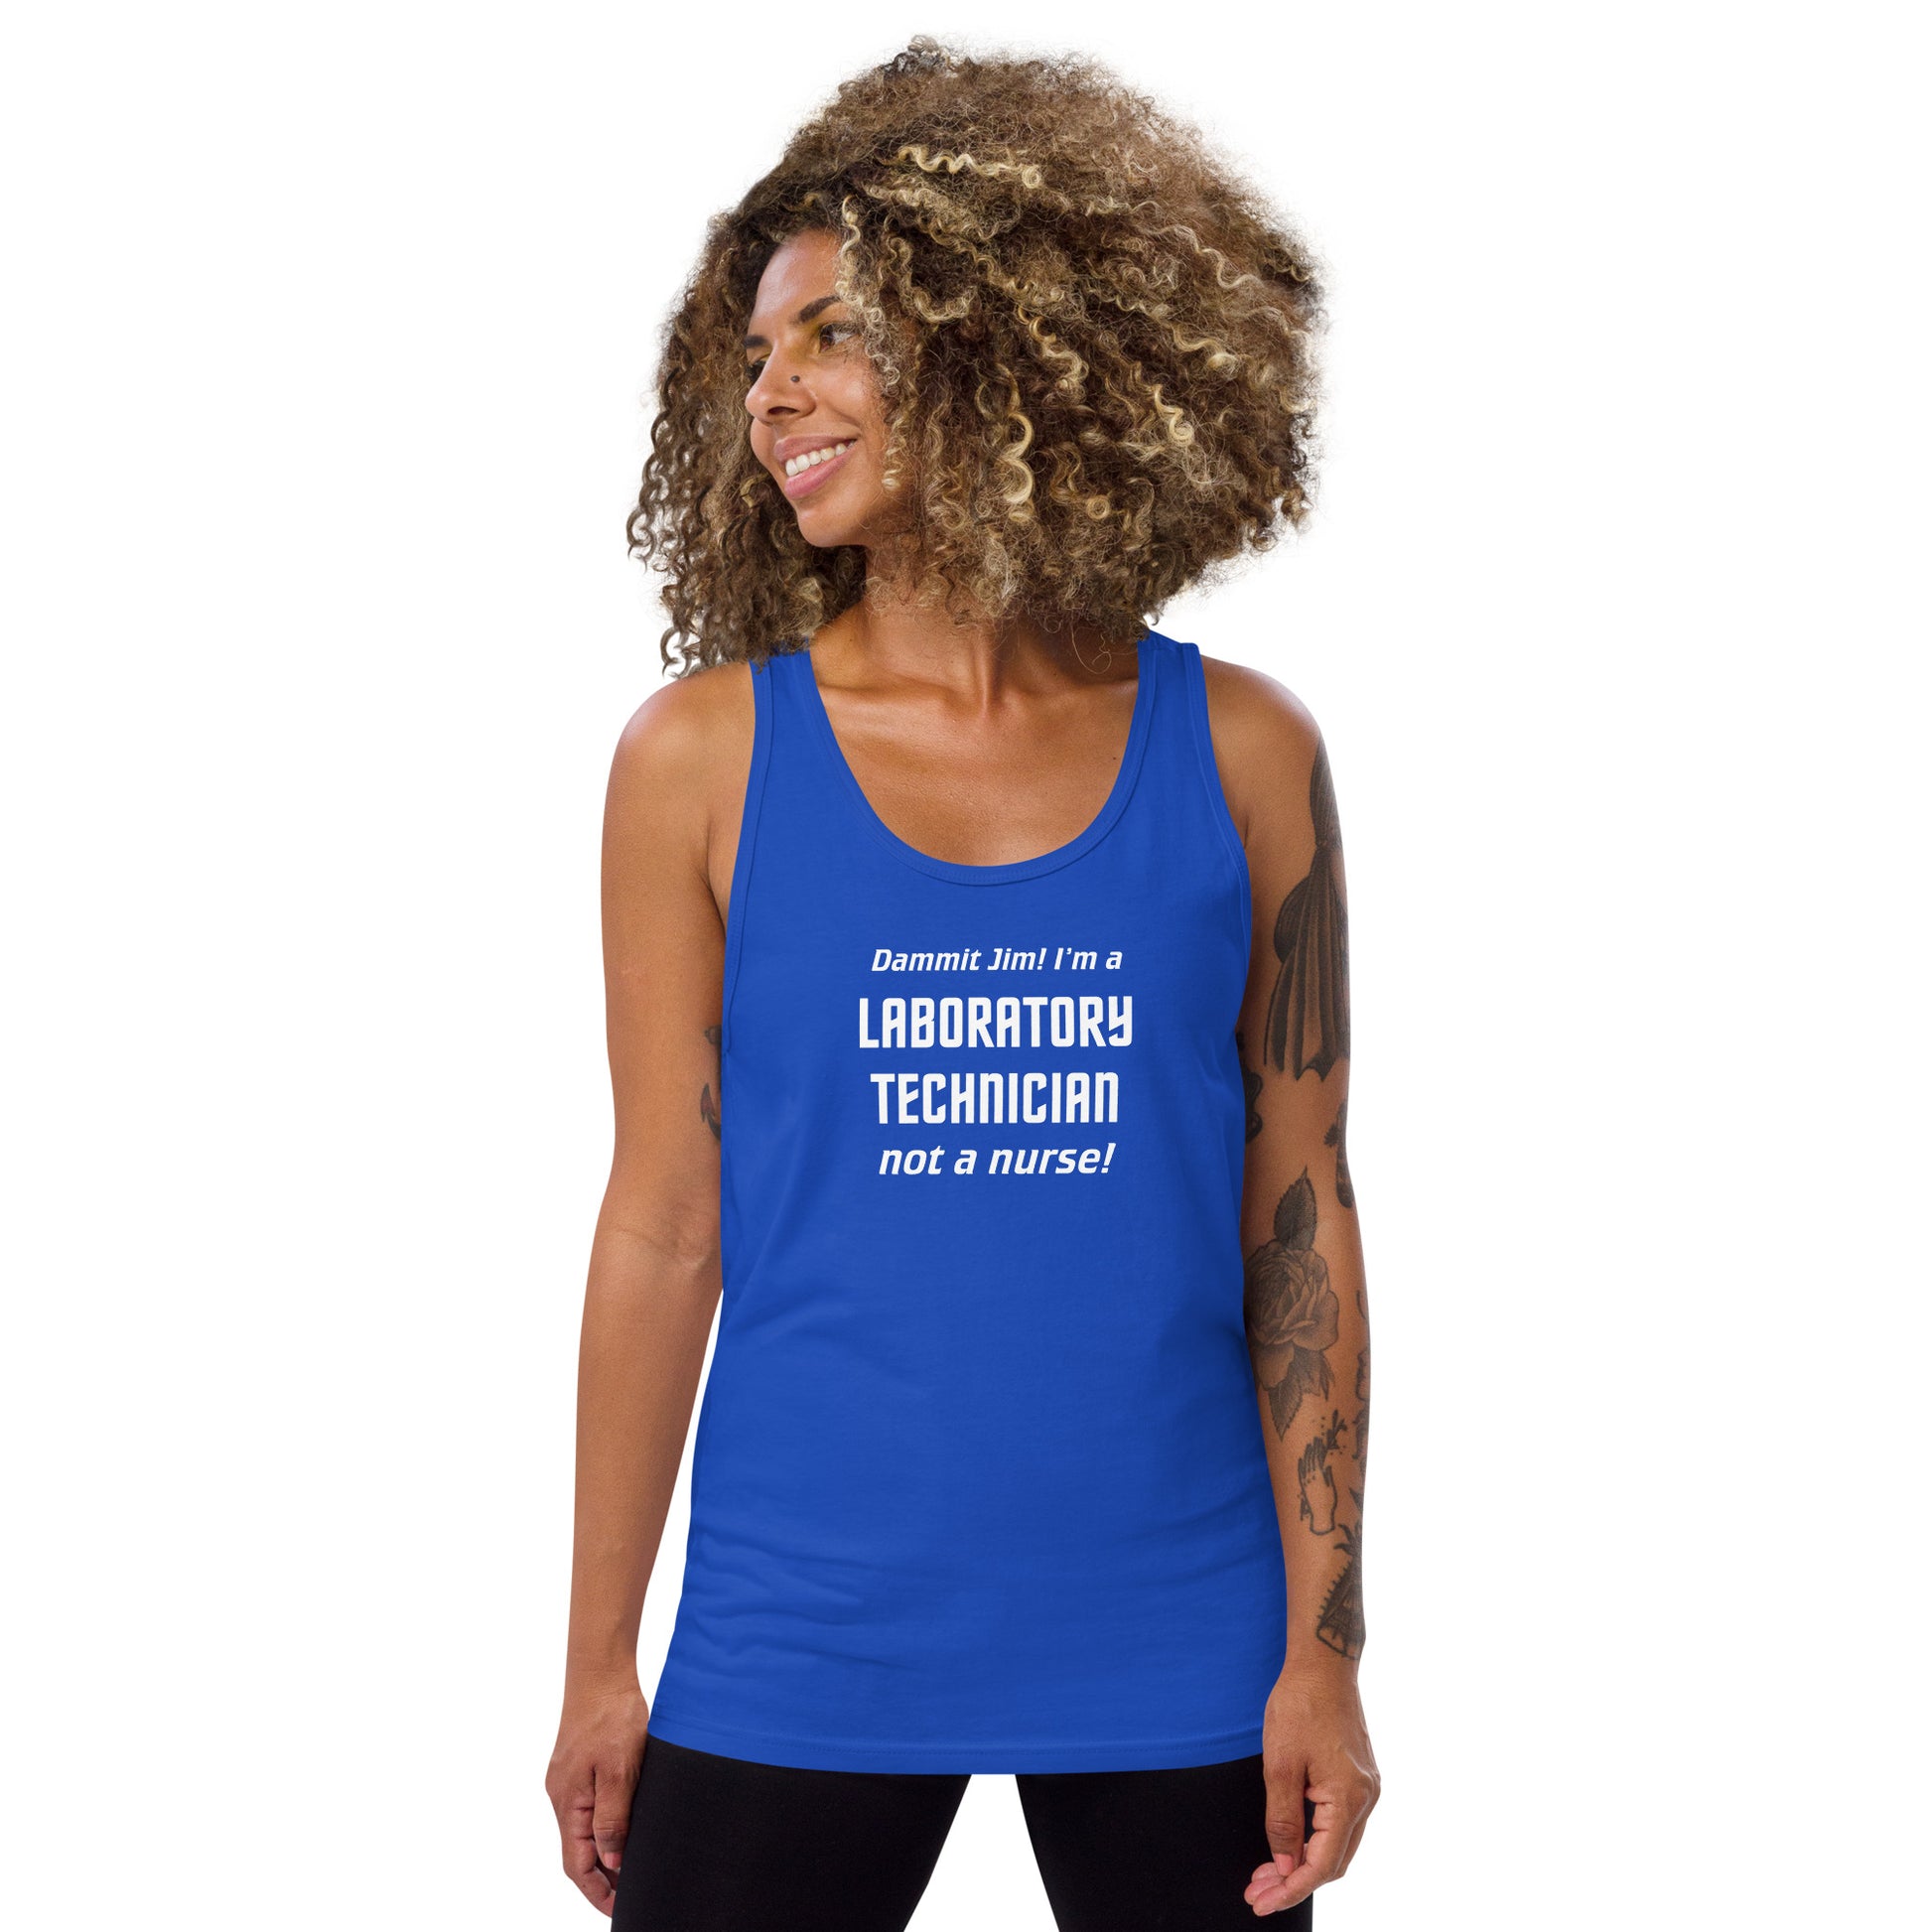 Model wearing True Royal blue tank top with text graphic in Star Trek font: "Dammit Jim! I'm a LABORATORY TECHNICIAN not a nurse!"